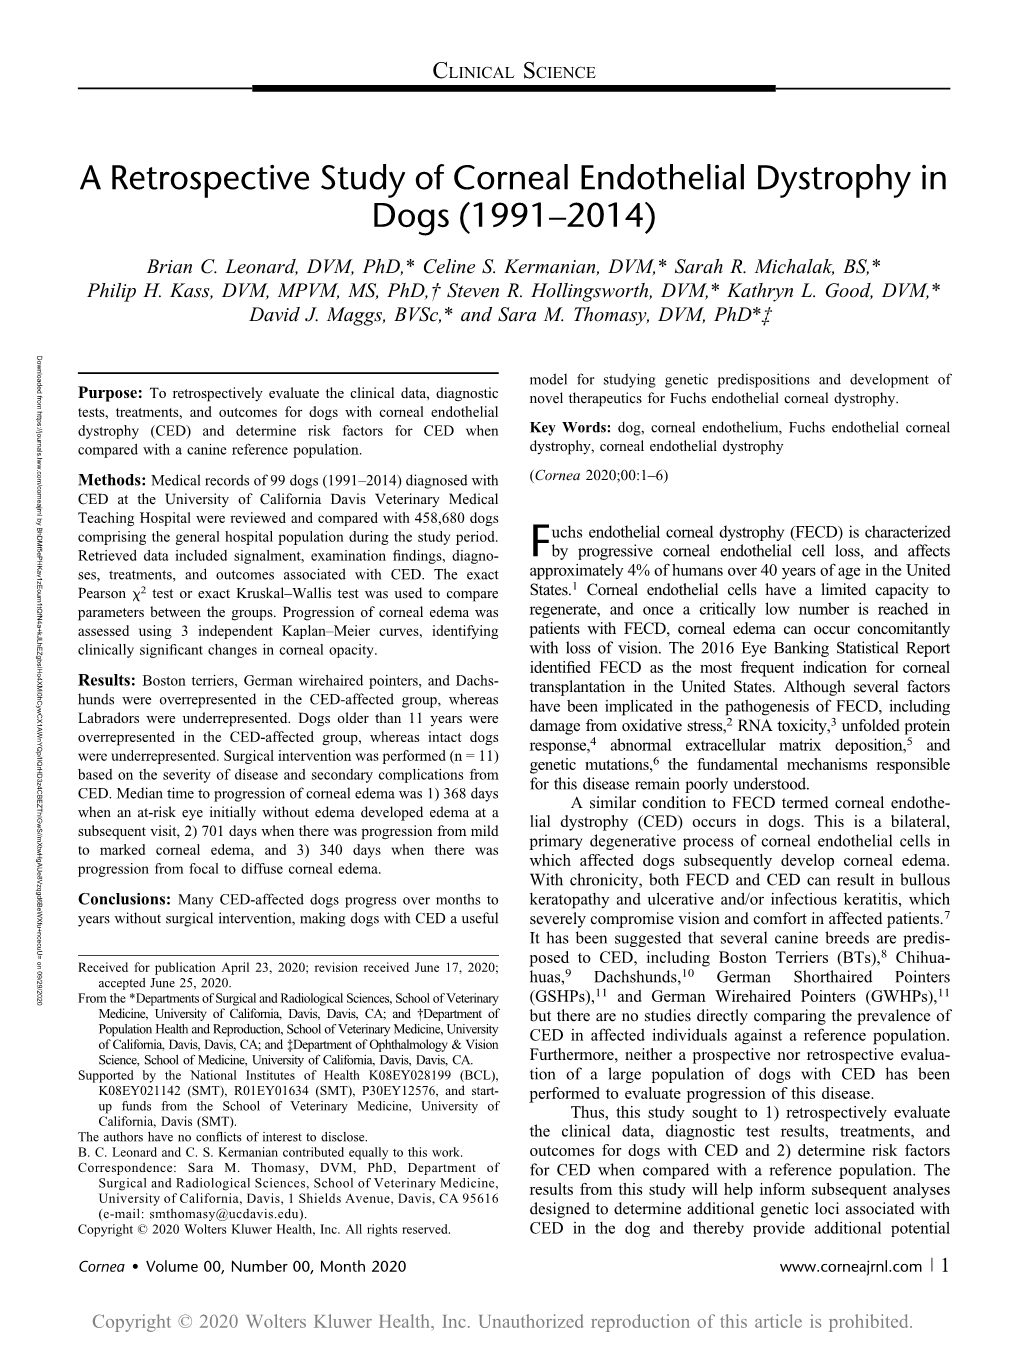 A Retrospective Study of Corneal Endothelial Dystrophy in Dogs